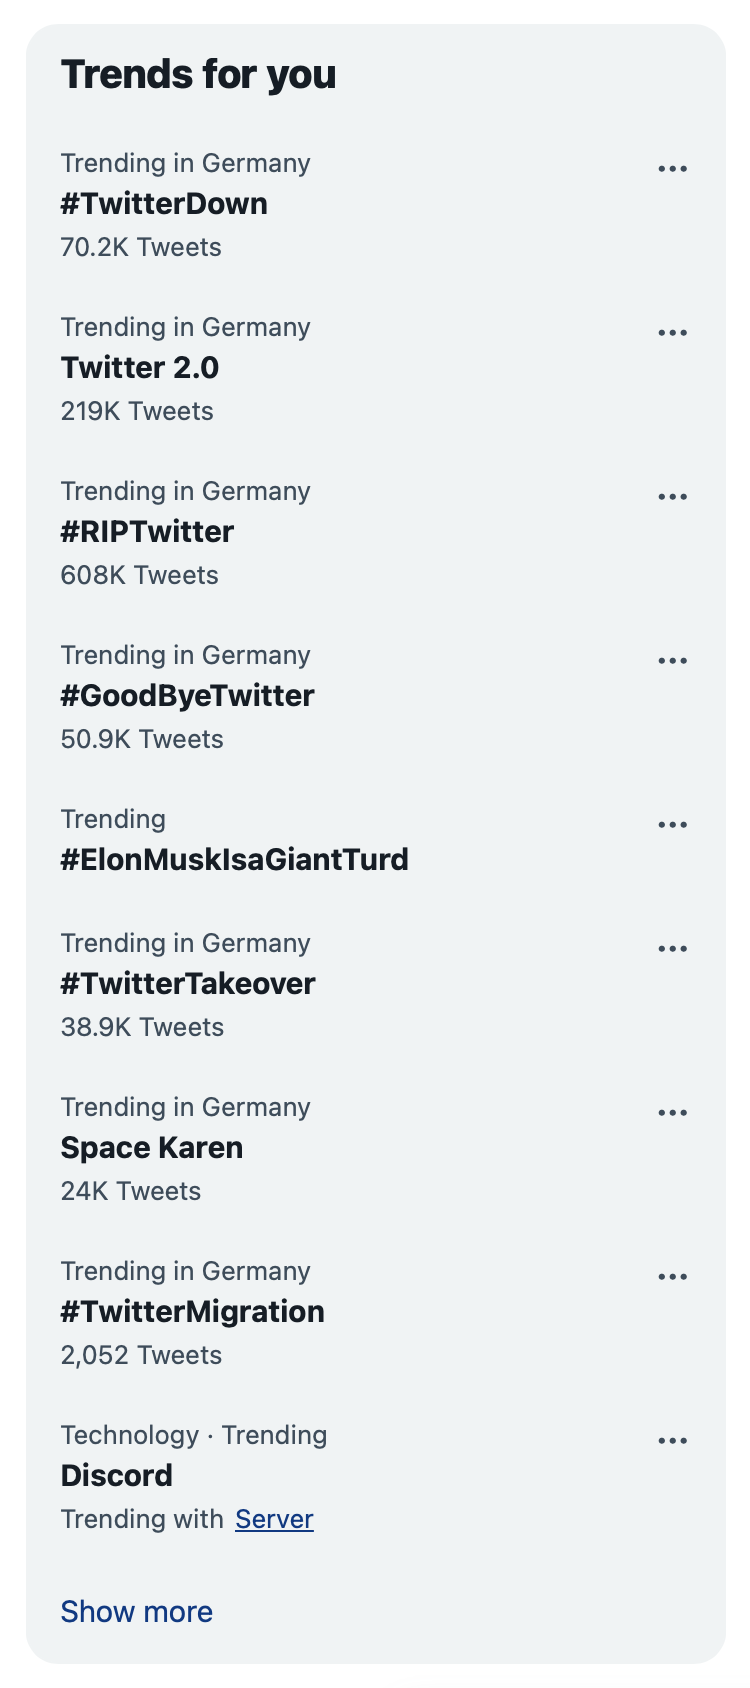 Twitter’s “Trends for you” containing #TwitterDown, Twitter 2.0, #RIPTwittter, #GoodByeTwitter, #ElonMuskIsAGiantTurd, #TwitterTakeover, #TwitterMigration and Discord. Also, Space Karen, but I have no idea what that refers to.